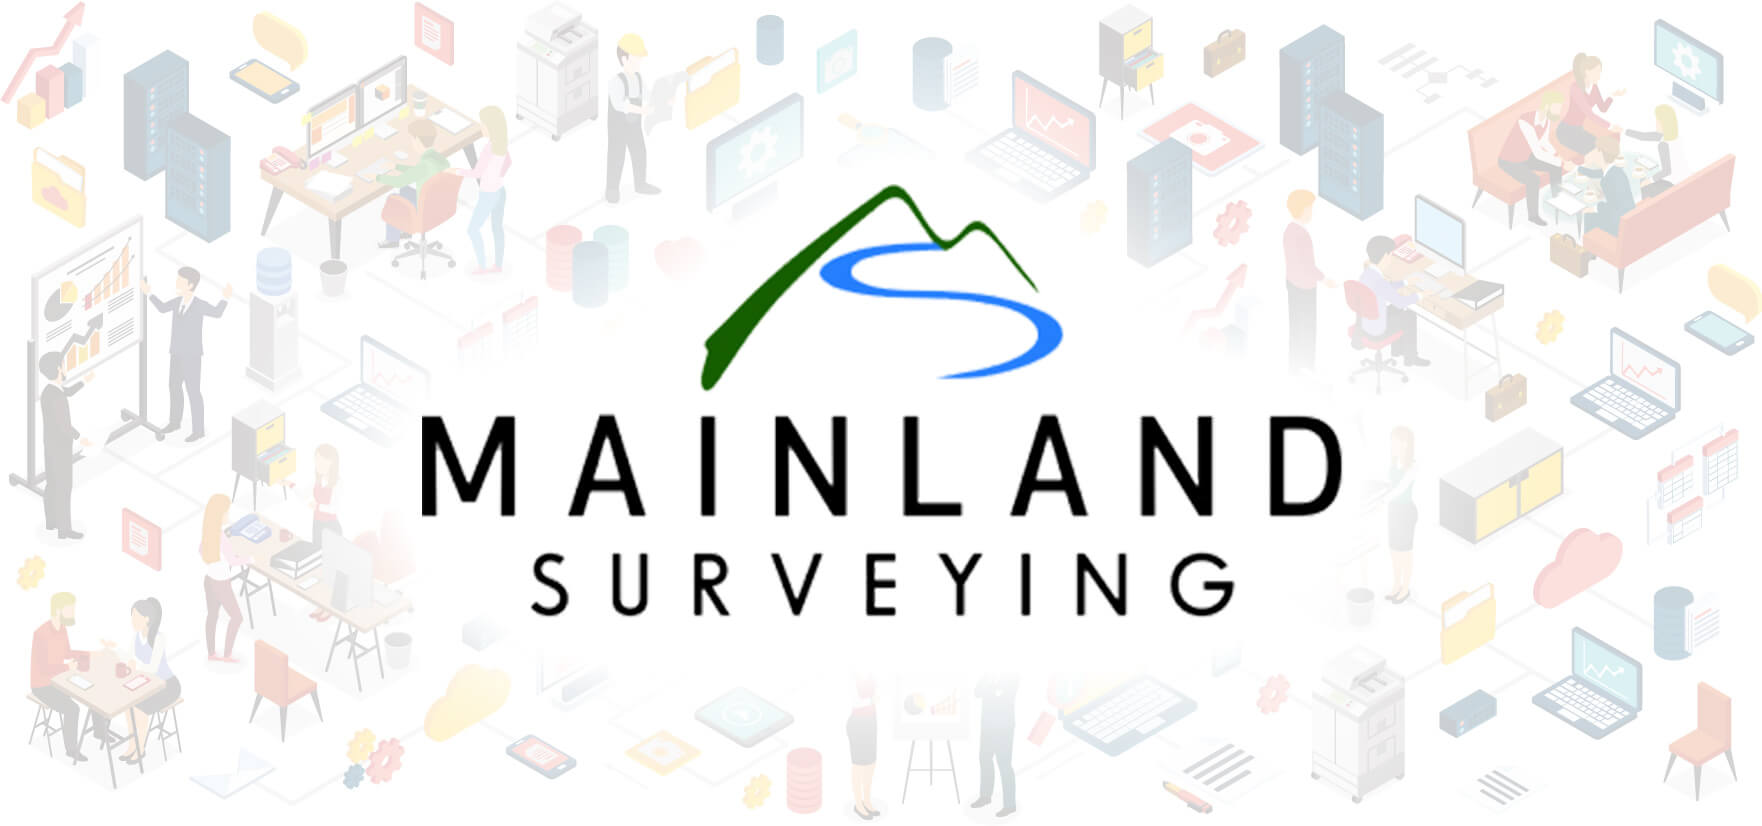 Interview with Mainland Surveying